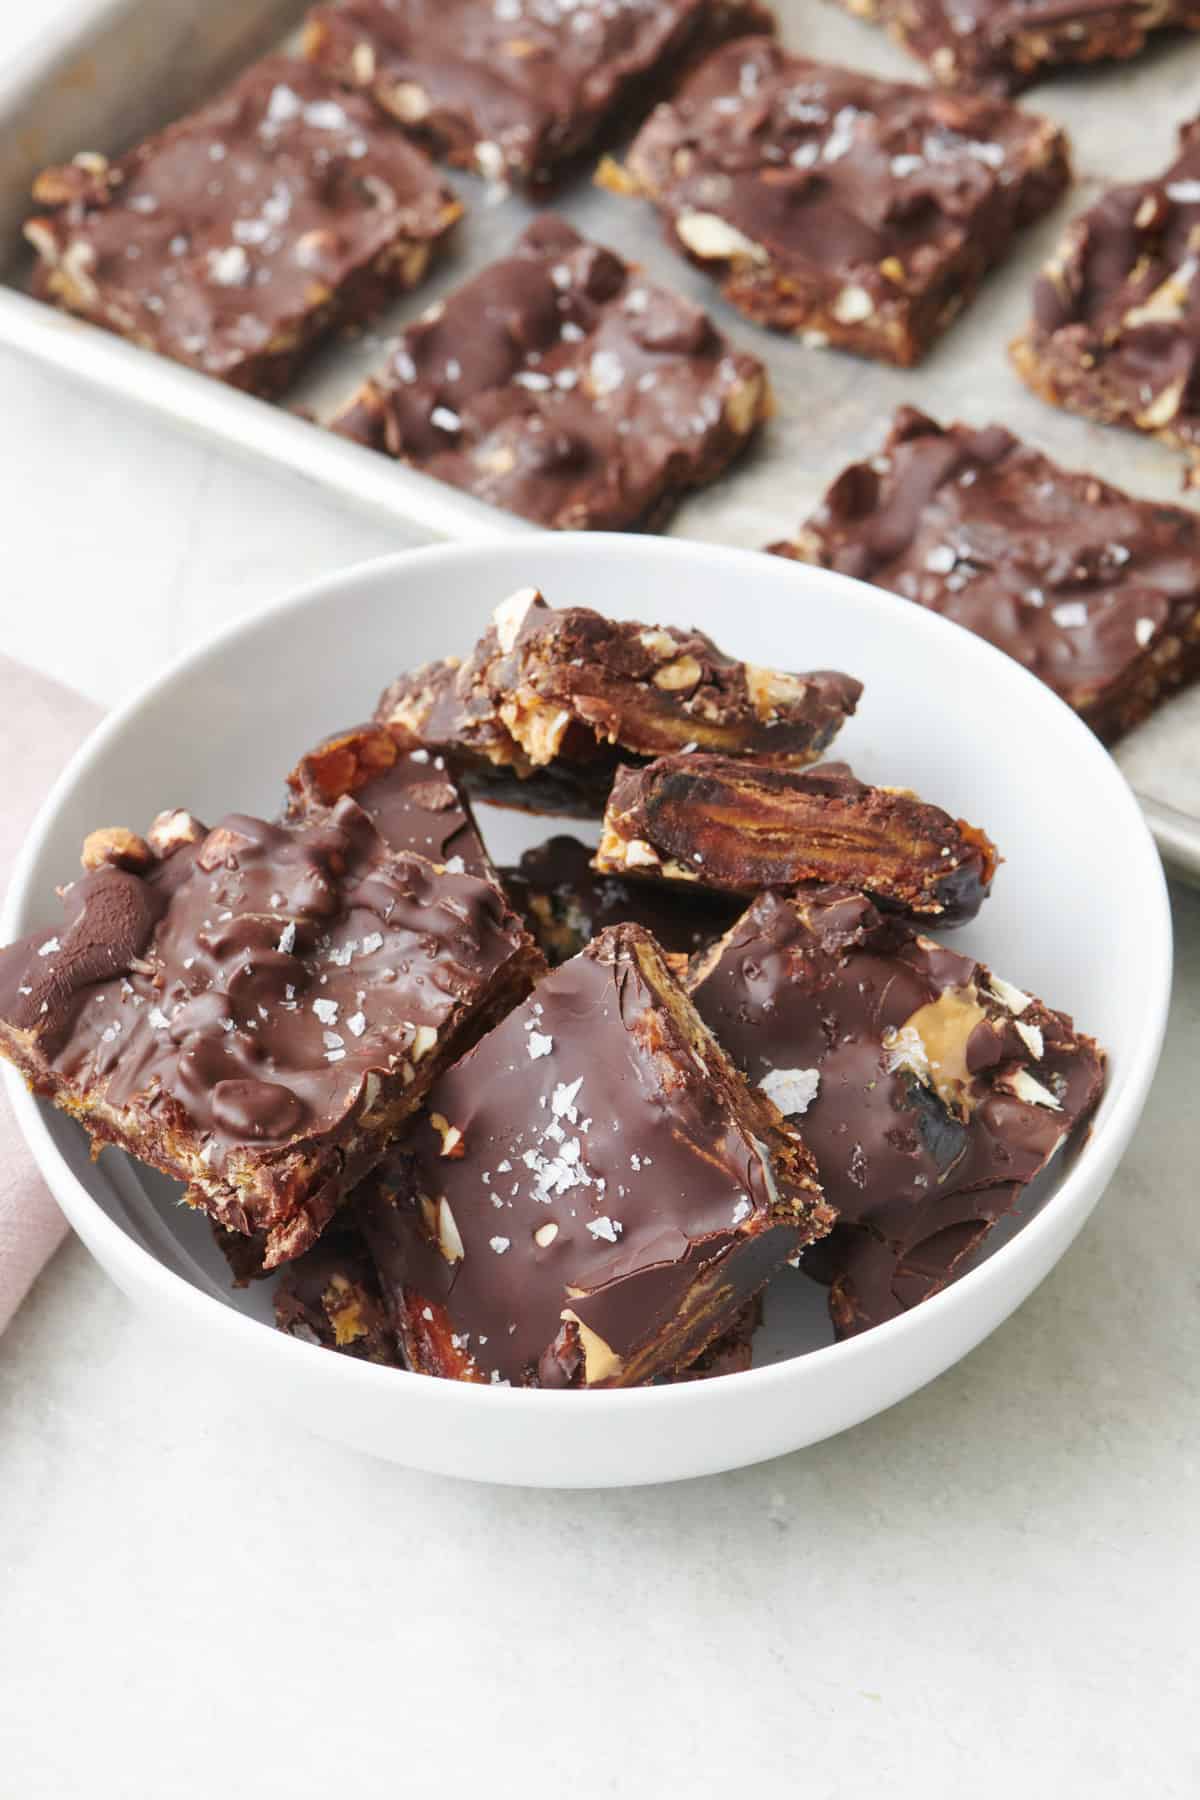 Date bark pieces in a bowl with tray of more nearby.